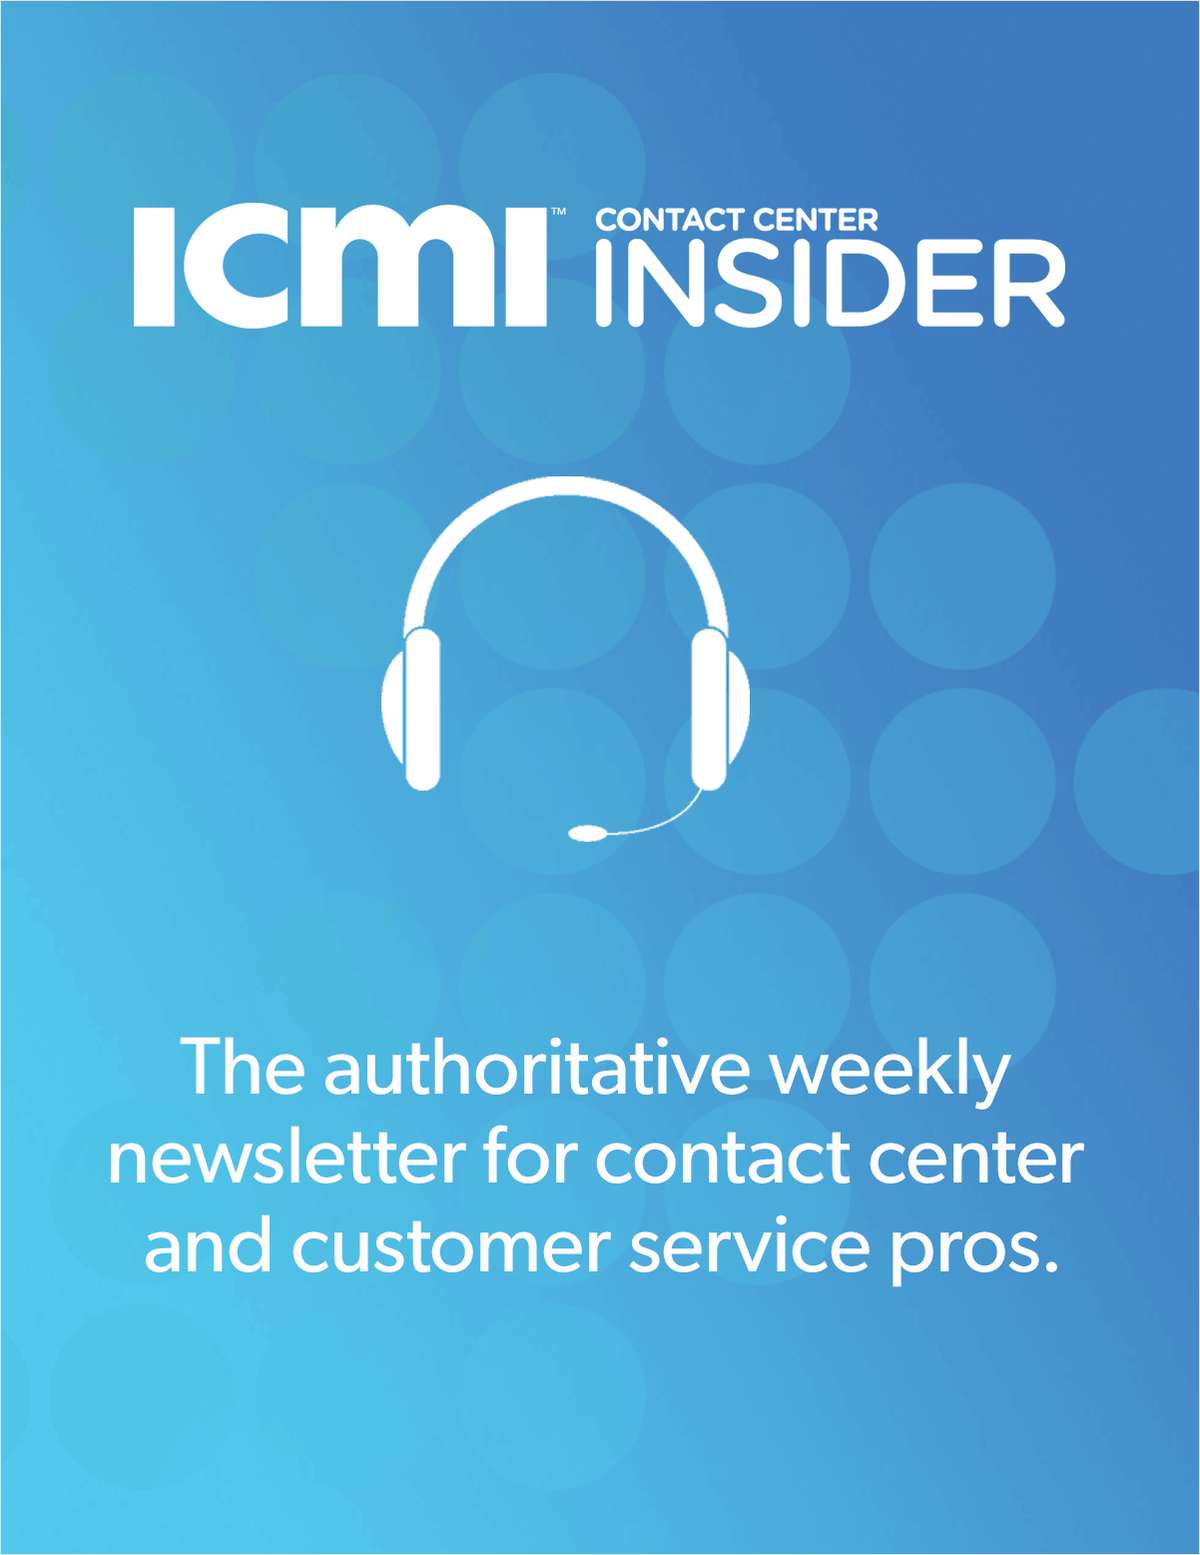 STAY CONNECTED TO THE ICMI COMMUNITY YEAR-ROUND!